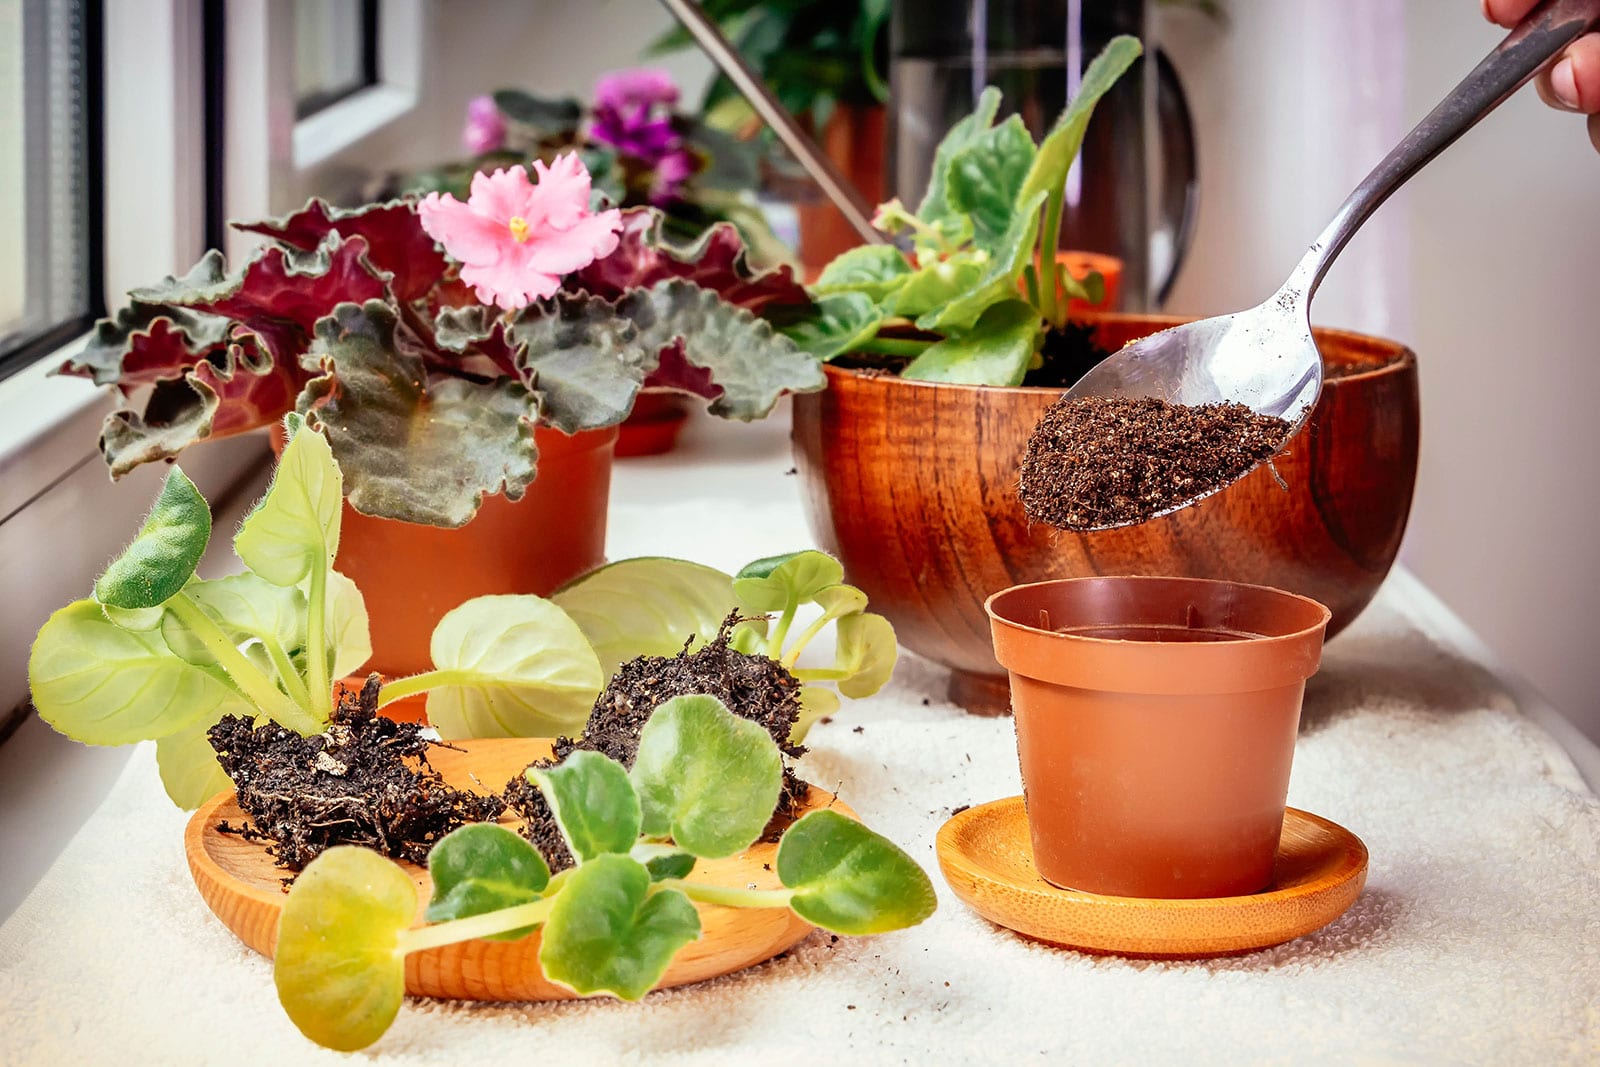 Scene showing the process of dividing and repotting African violet plantlets next to a window, with potted plants, a spoon scooping soil, and a plastic container with bamboo saucer